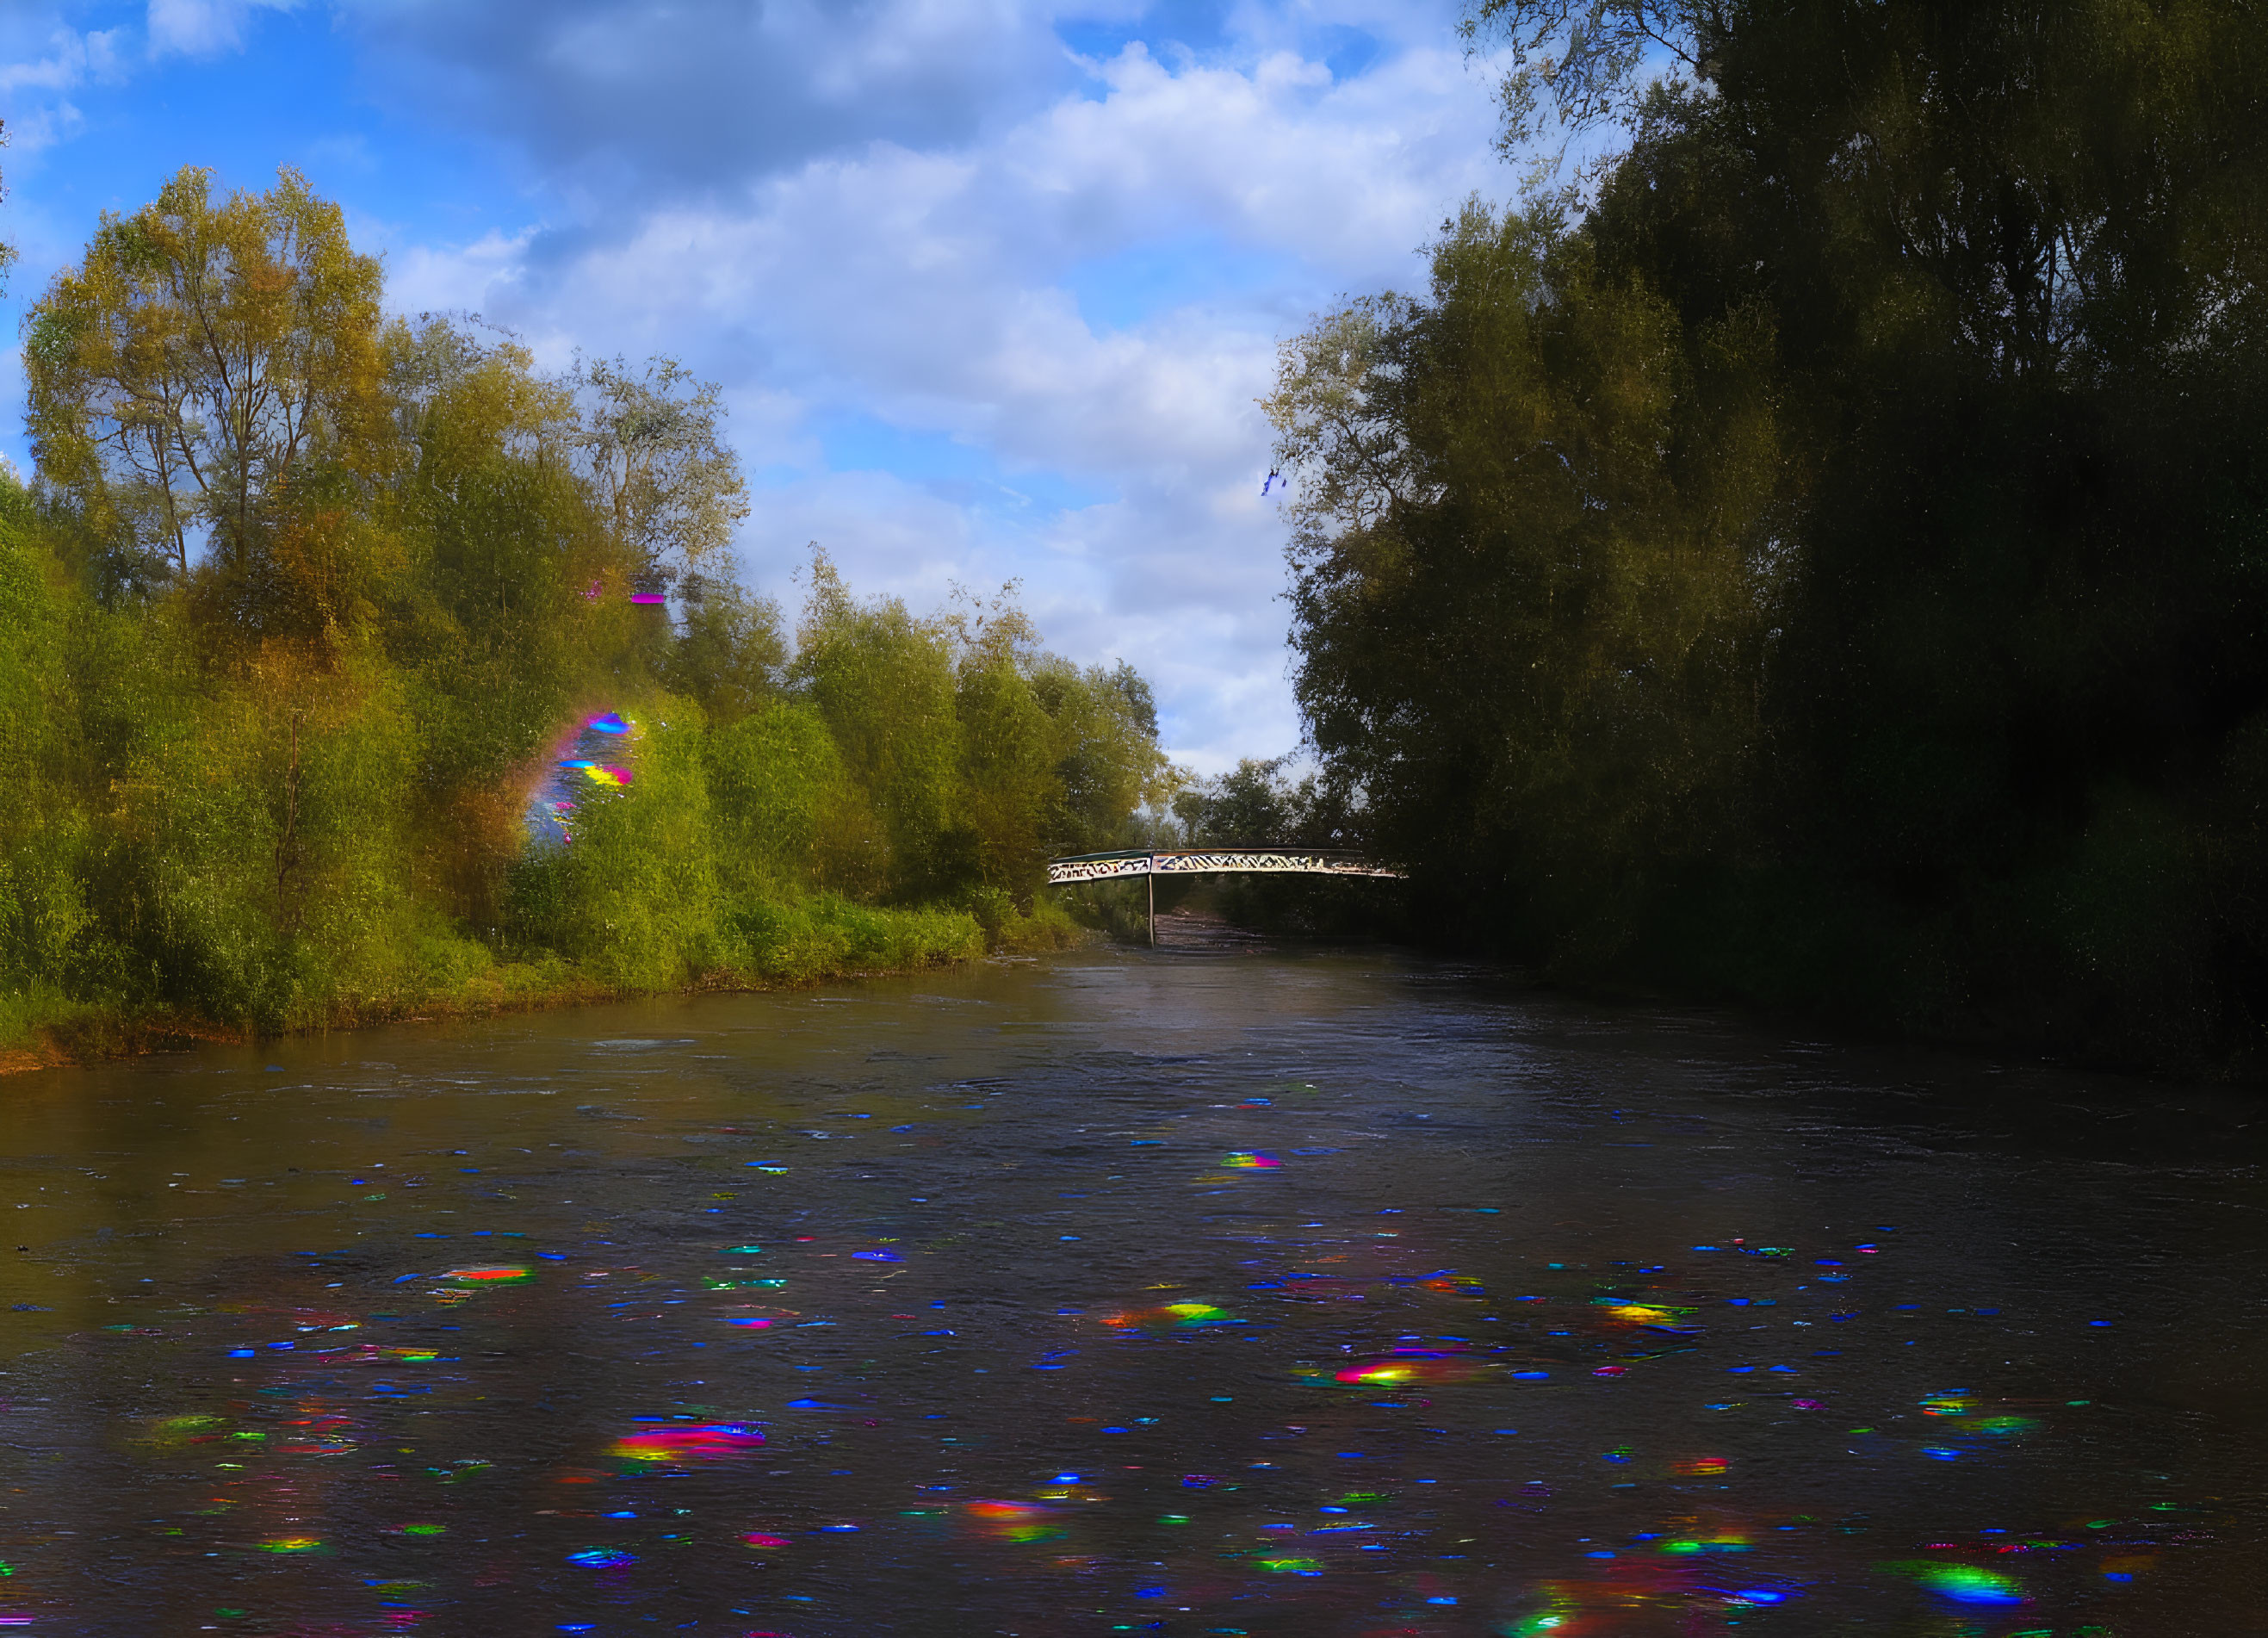 Scenic river landscape with rainbow light spots and lush greenery